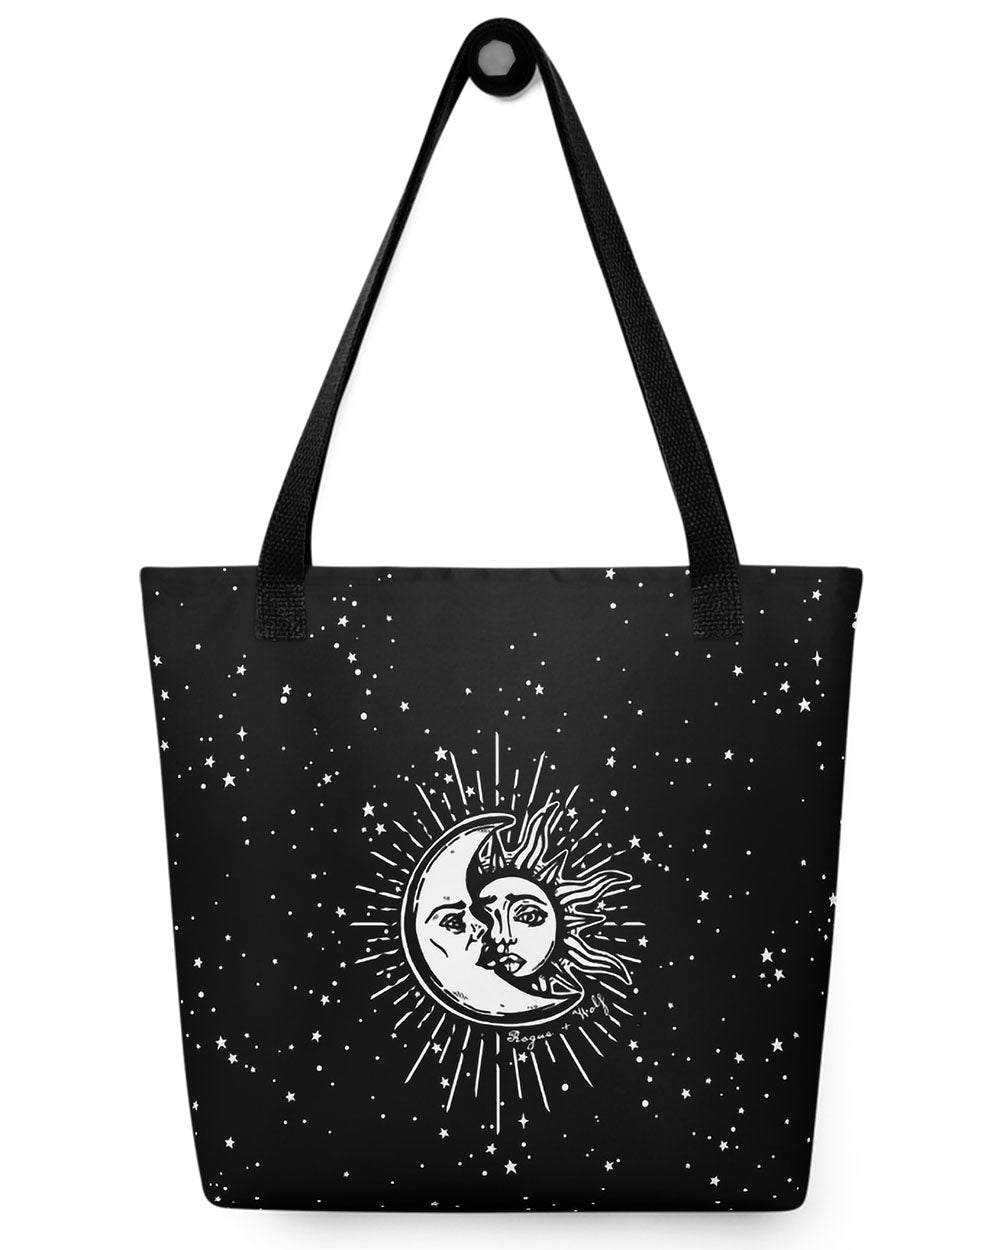 Astral Tote Bag - Sun & Moon Dark Academia Witchy Goth Style - Grunge Aesthetic Bag - On-Demand Sustainable Alt Accessories